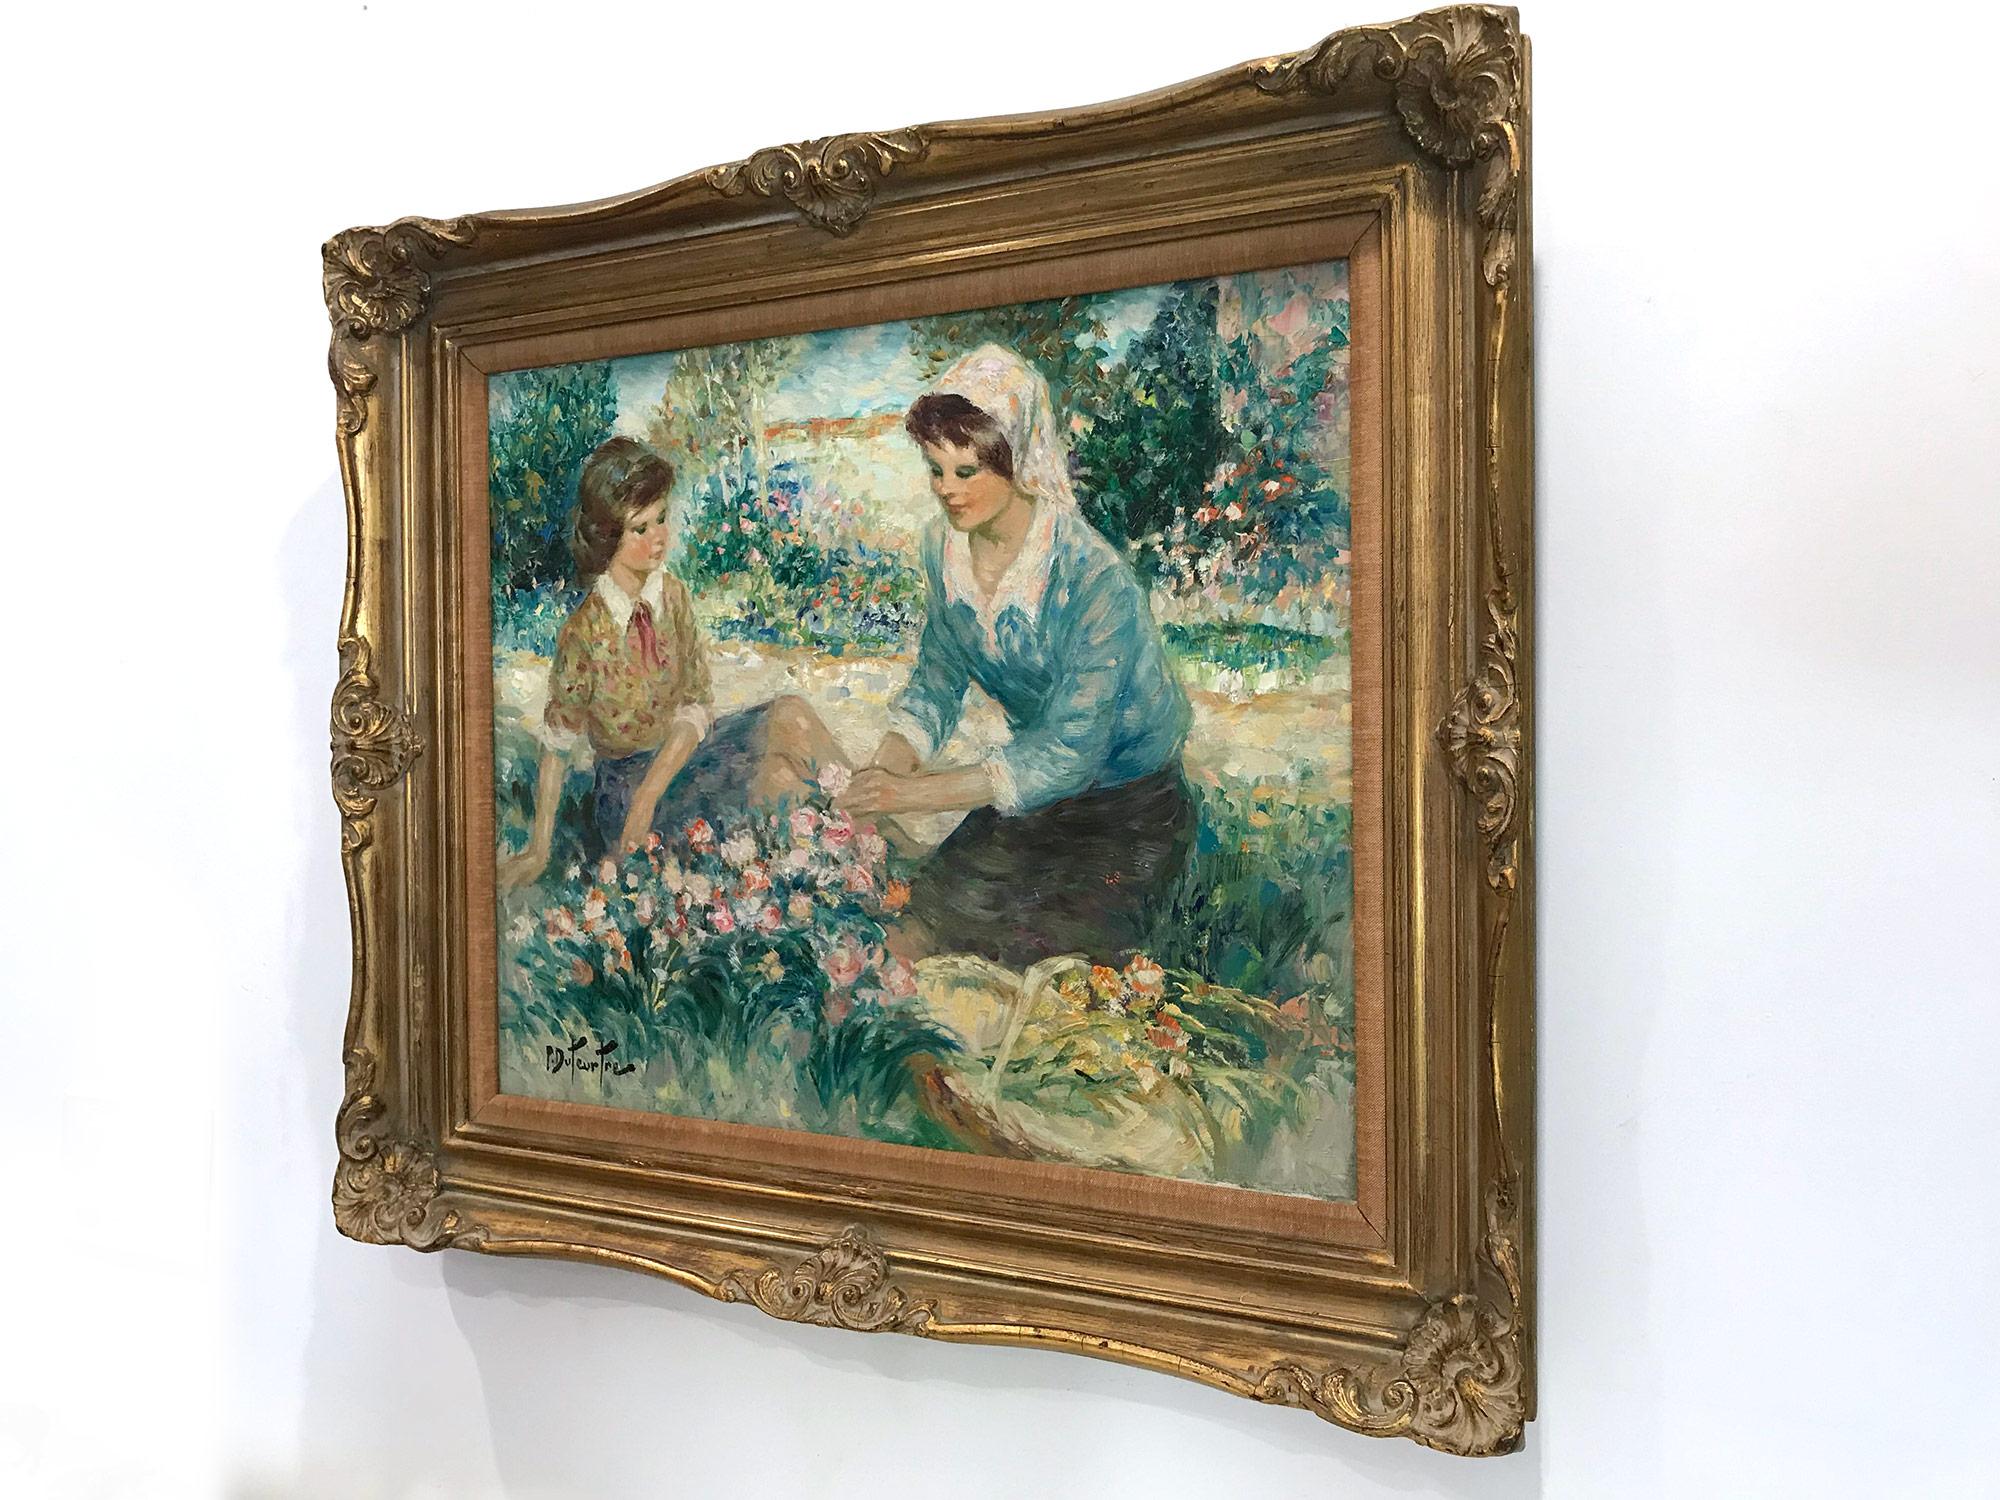 A stunning oil painting depicting figures in a garden picking flowers executed in the 20th Century. Duteurtre was known for his charming intimate figurative scenes portraying life in Europe. He was active, picking up subjects from the markets,